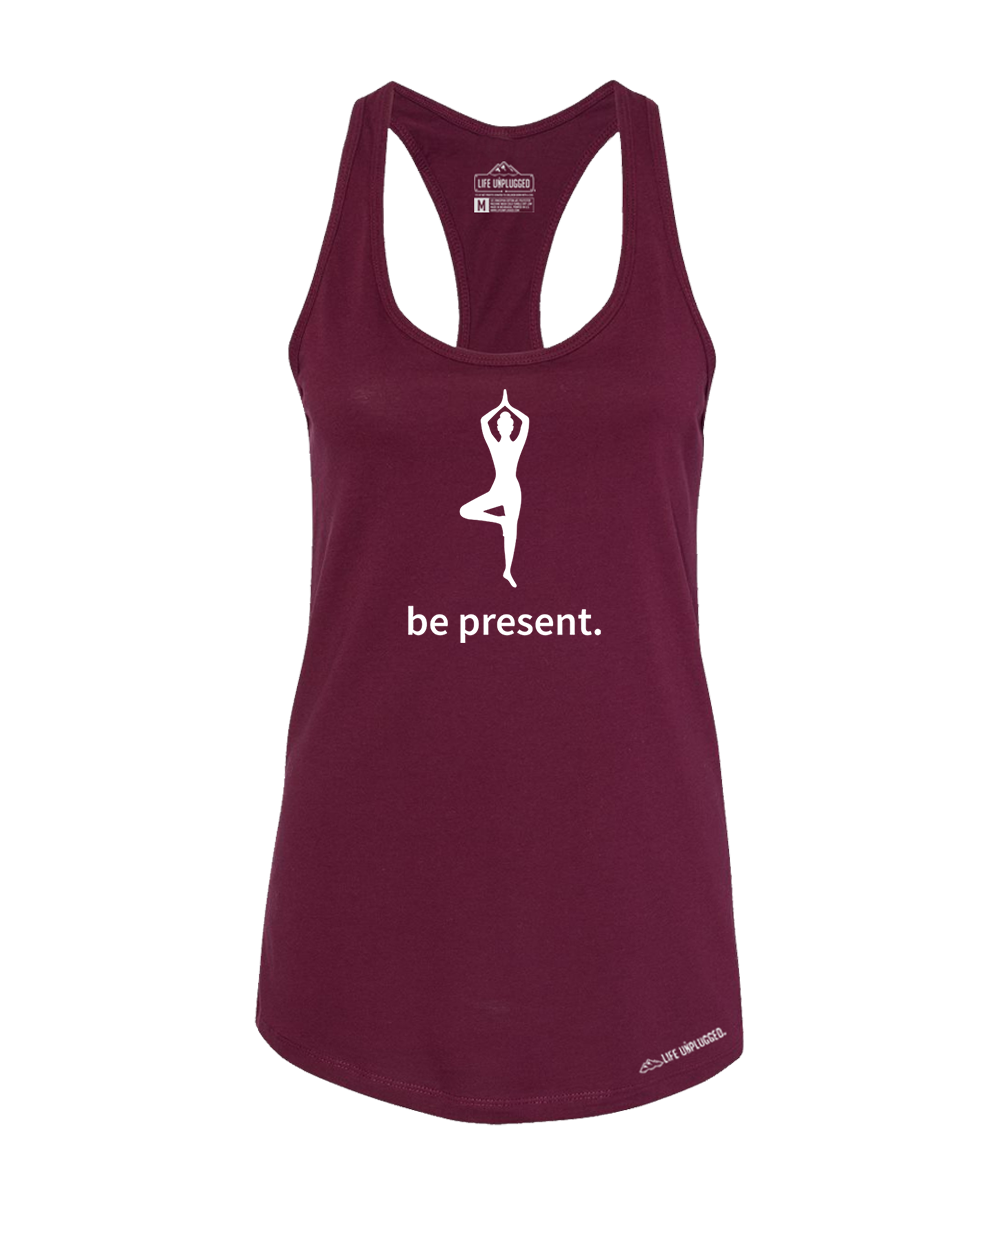 Yoga Premium Women's Relaxed Fit Racerback Tank Top - Life Unplugged